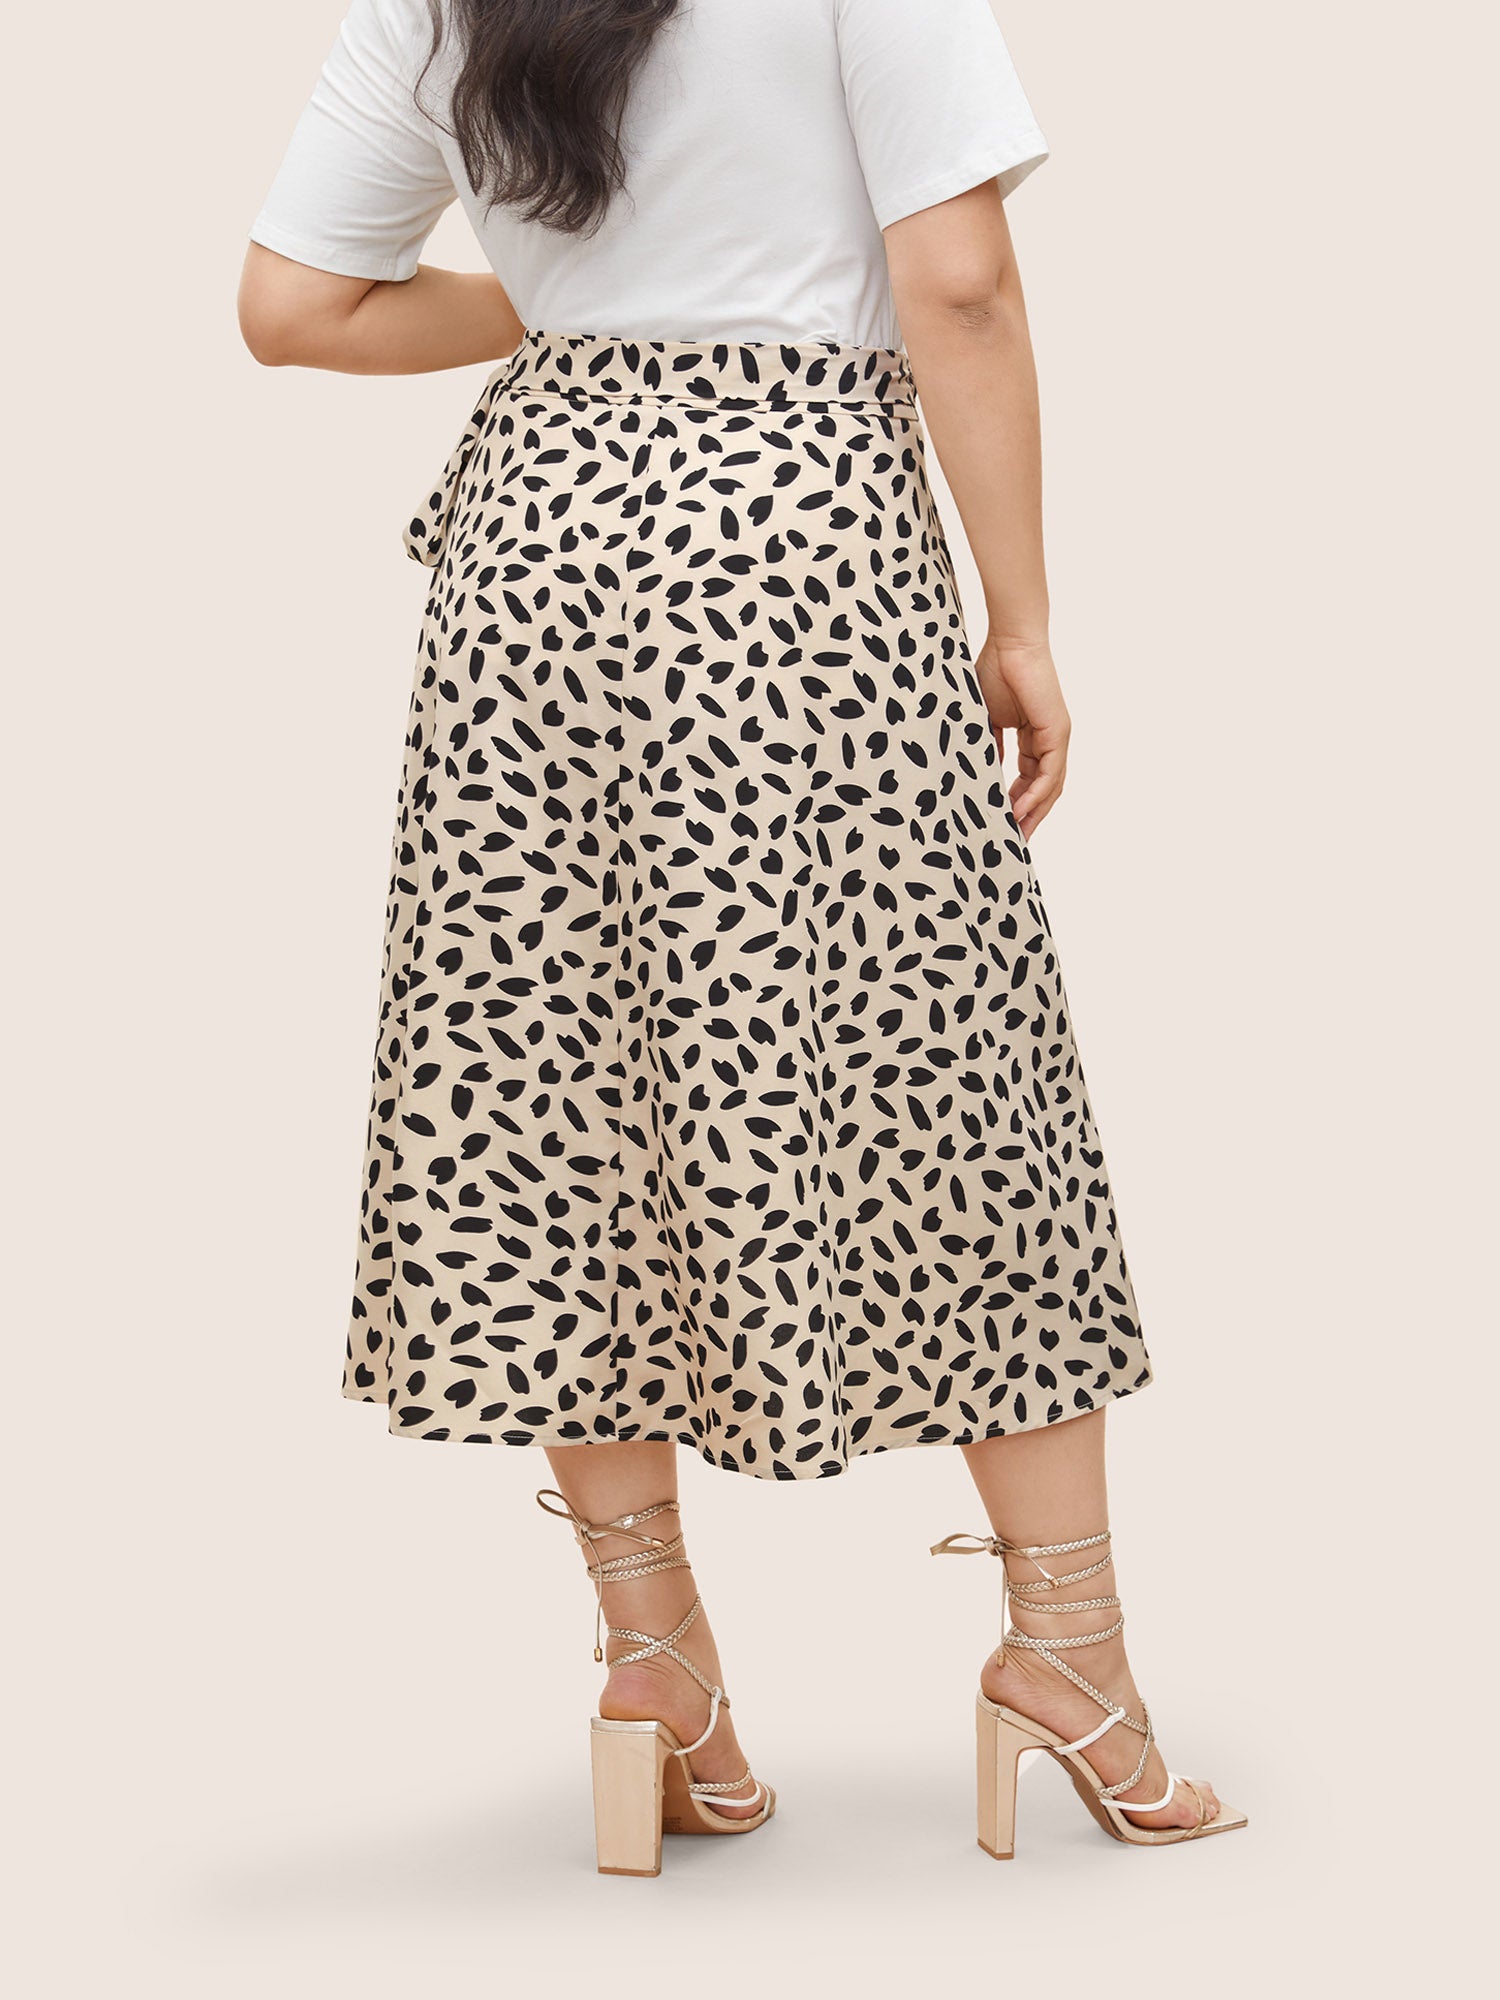 Graphic Ties Knotted Wrap Hem Skirt